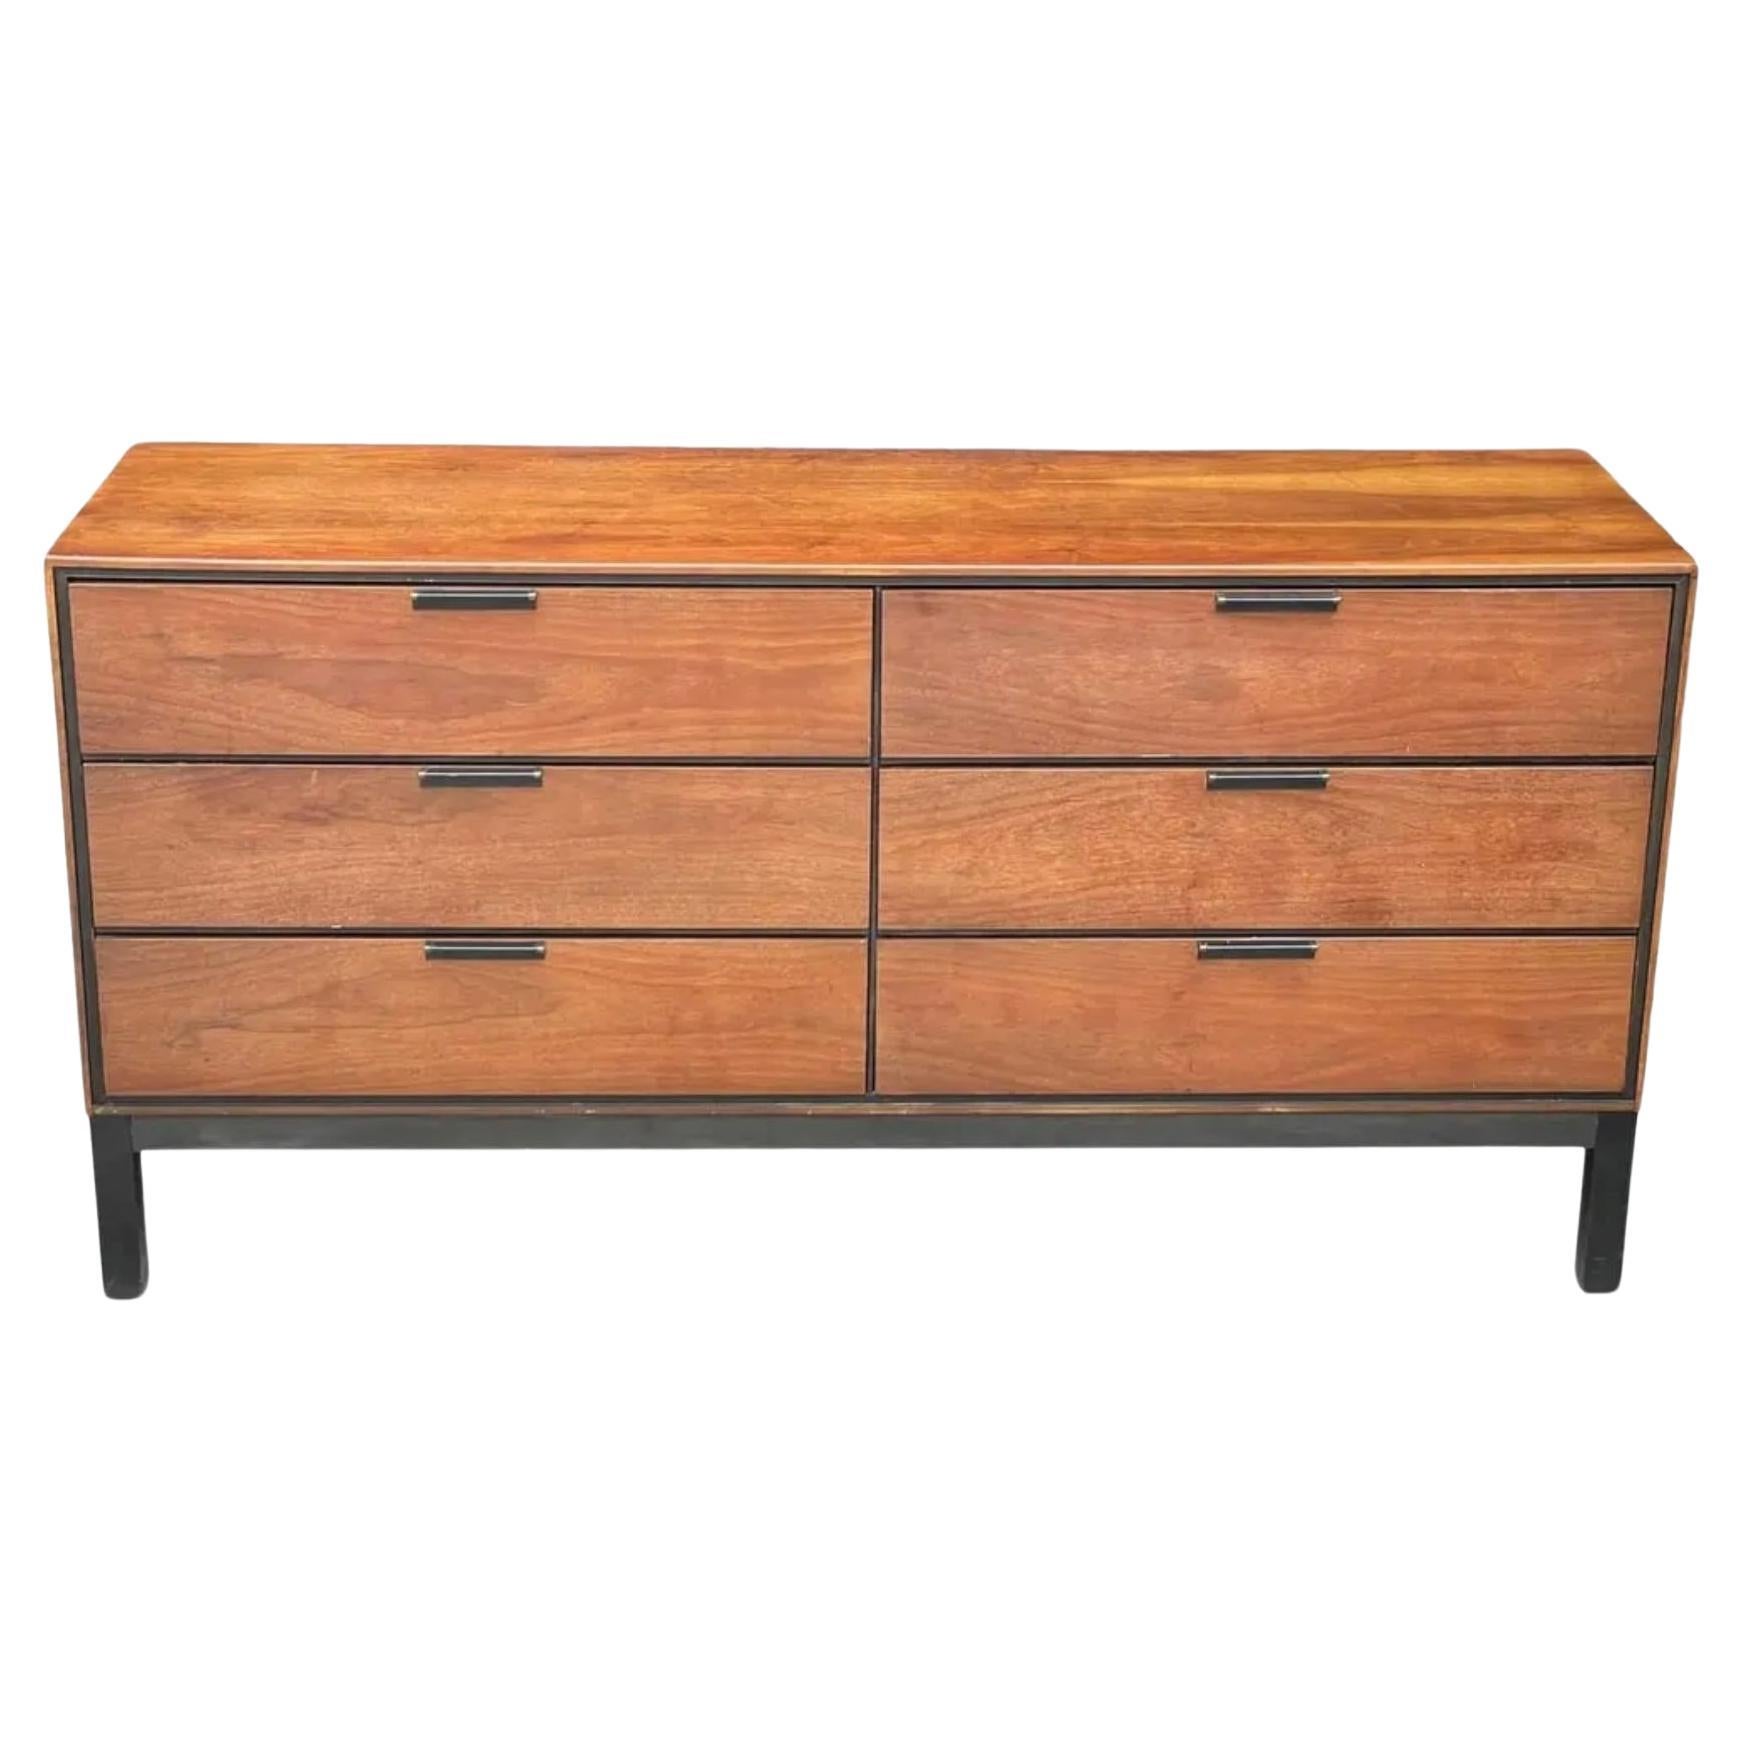 Handsome Mid Century Modern 6 drawer walnut low dresser with black lacquered wood base. Walnut wood with black lacquer accents and its base has black low profile handles made in USA Circa 1960. Located in Brooklyn NYC.


Dimensions 60